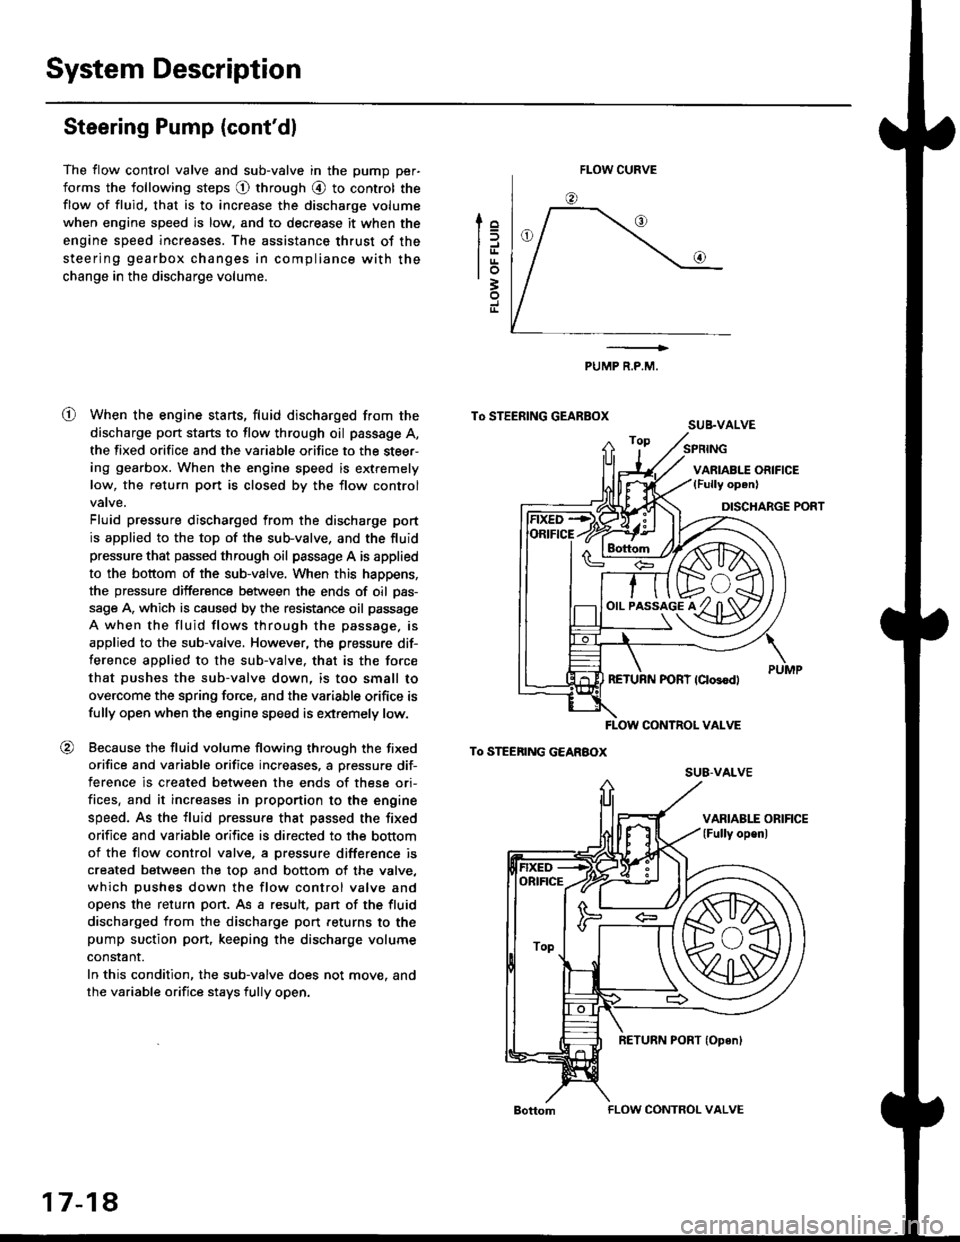 HONDA CIVIC 1996 6.G Owners Guide System Description
Steering Pump (contdl
The flow control valve and sub-valve in the pump per-
forms the following steps @ through @ to control the
flow of fluid, that is to increase the discharge vo